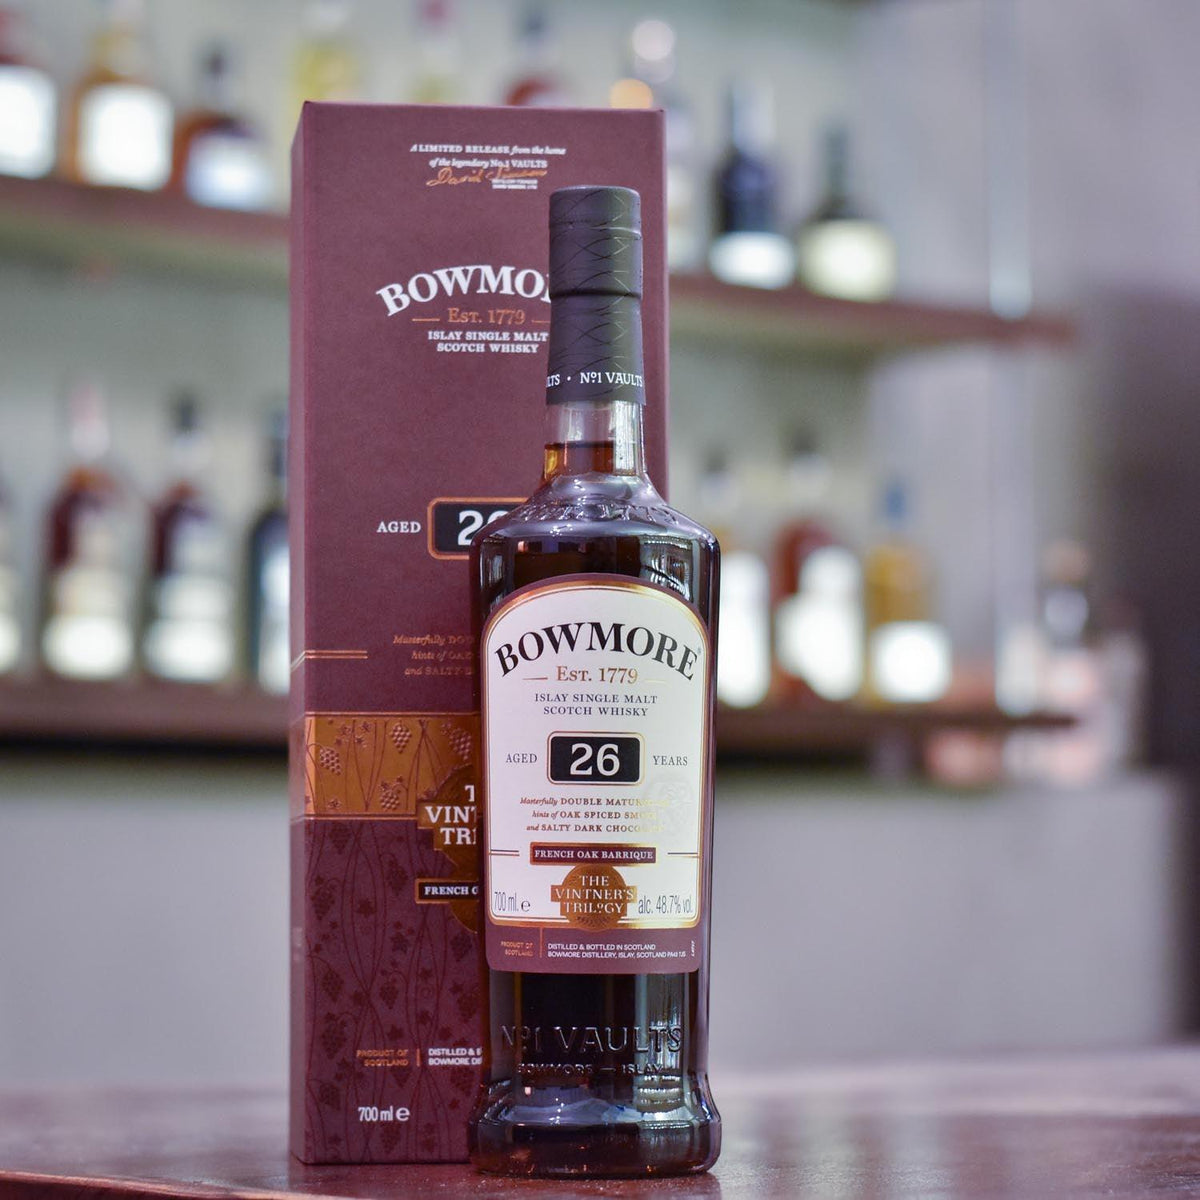 Bowmore 26 Year Old The Vintner's Trilogy - French Oak Barrique - The Rare Malt